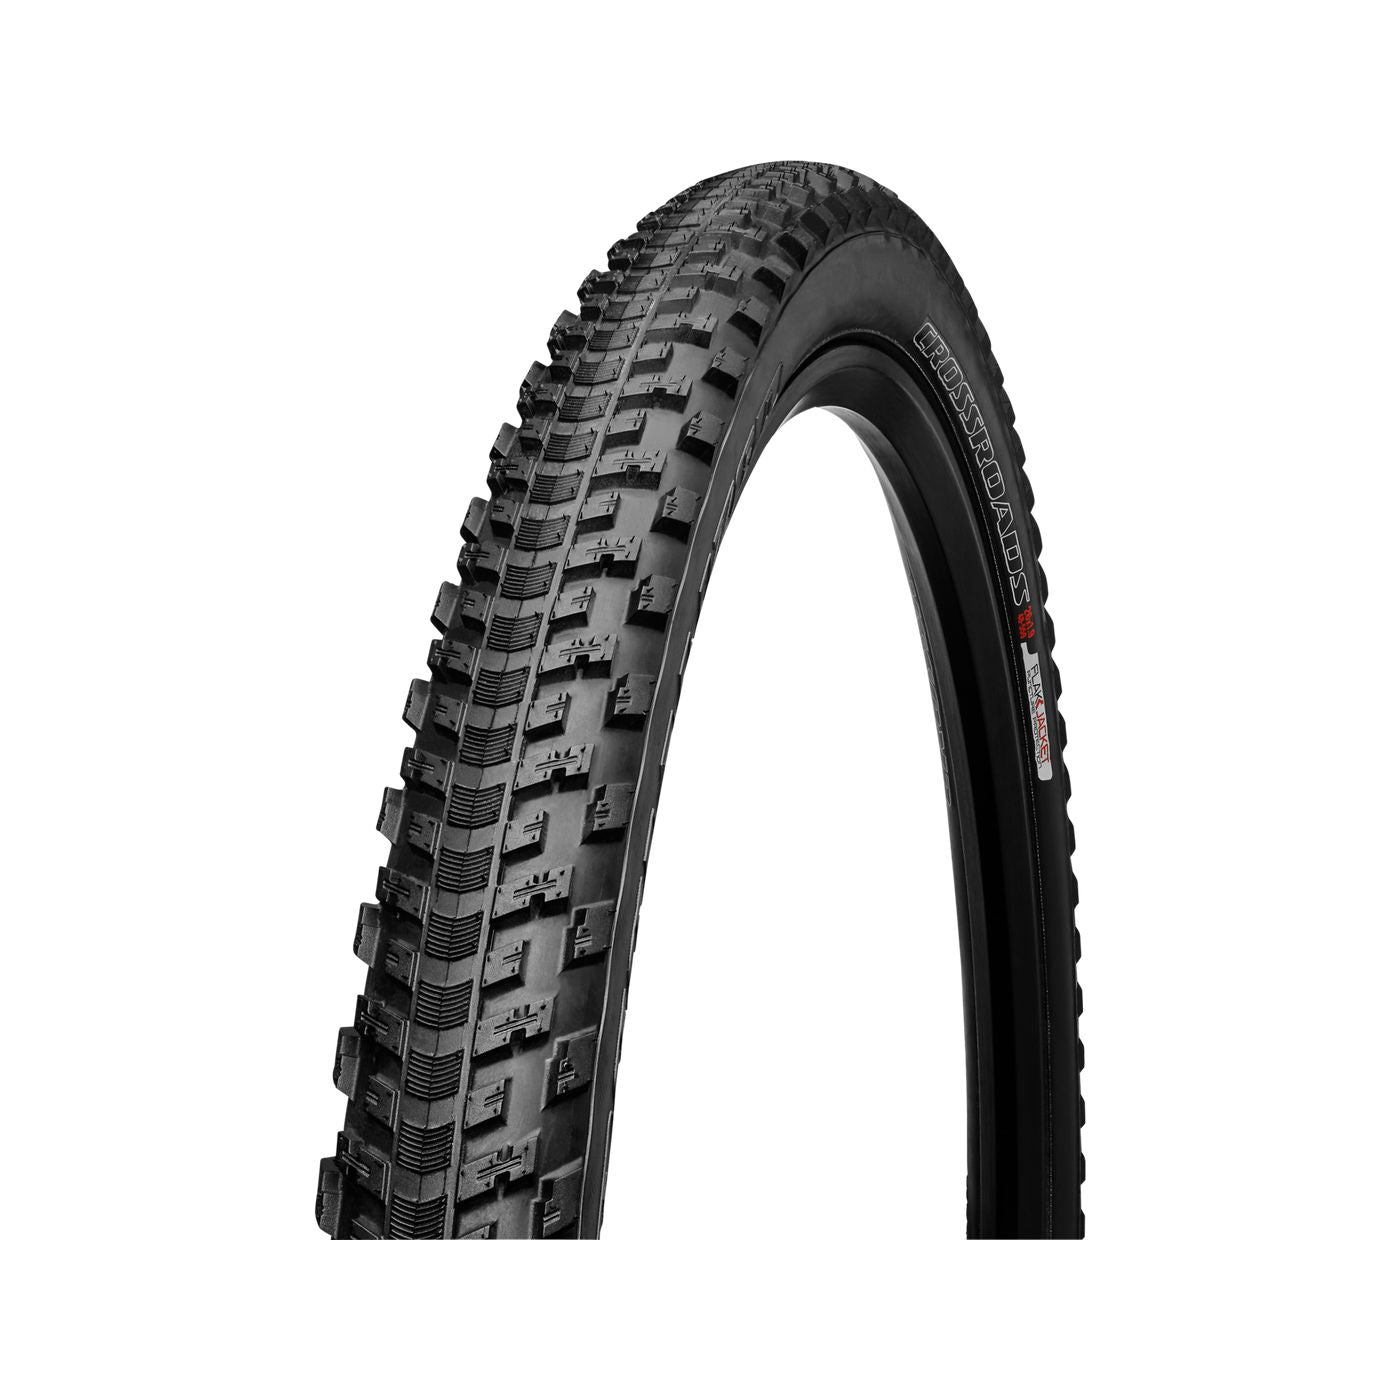 Specialized Crossroads 26" Bike Tire - Tires - Bicycle Warehouse